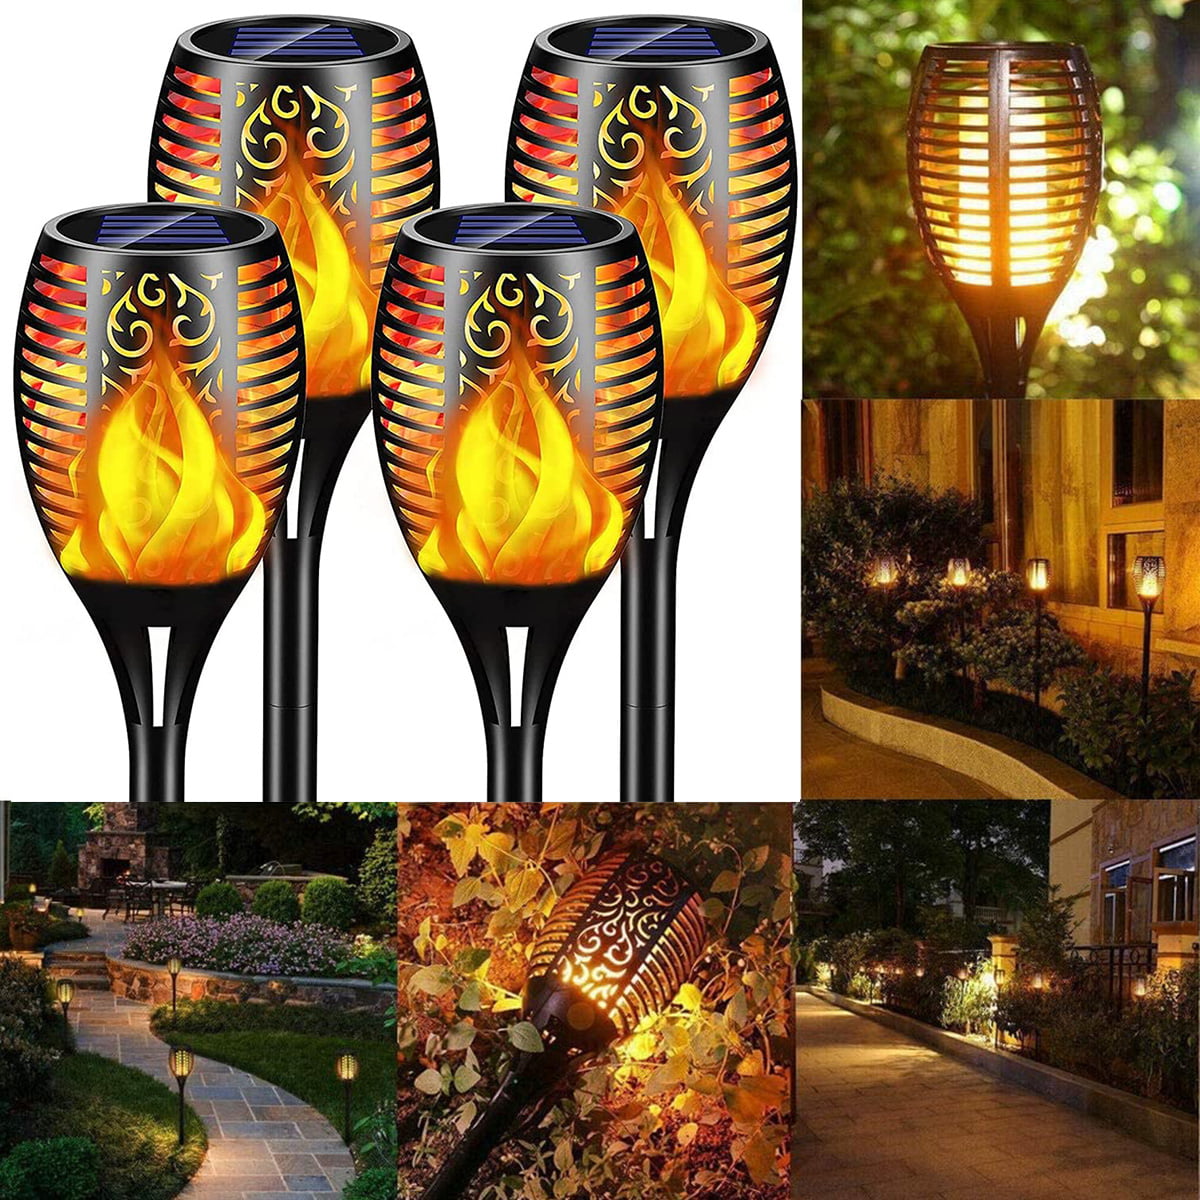 ChYoung 4 Pack Solar Lights Waterproof Flickering Flames Torches Lights Outdoor Solar Spotlights Landscape Decoration LED Light for Garden Pathways Yard Patio 